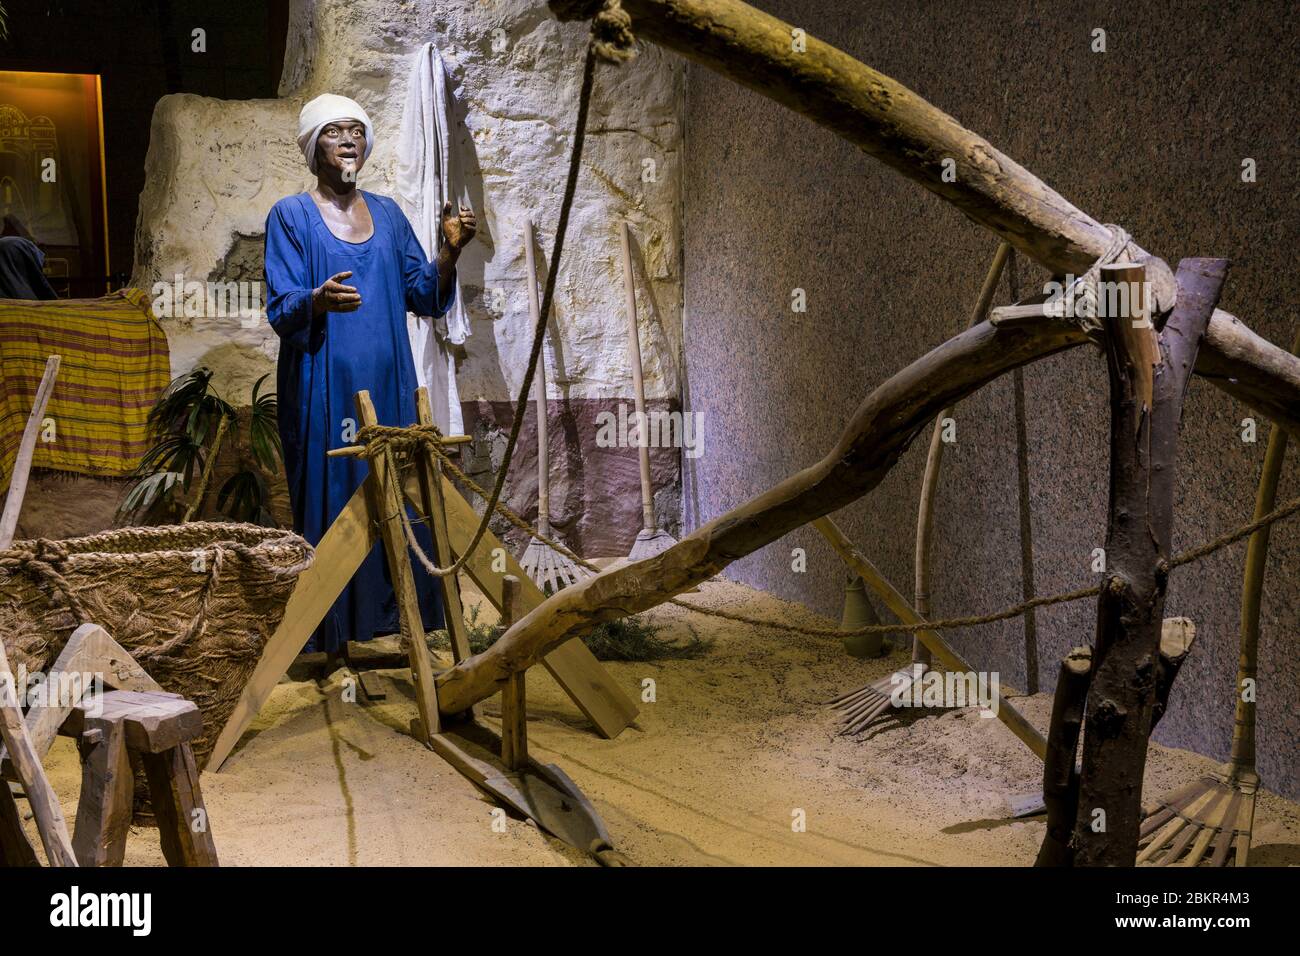 Egypt, Upper Egypt, Nile valley, Aswan, Nubia Museum, reconstruction from scenes of nubian life Stock Photo